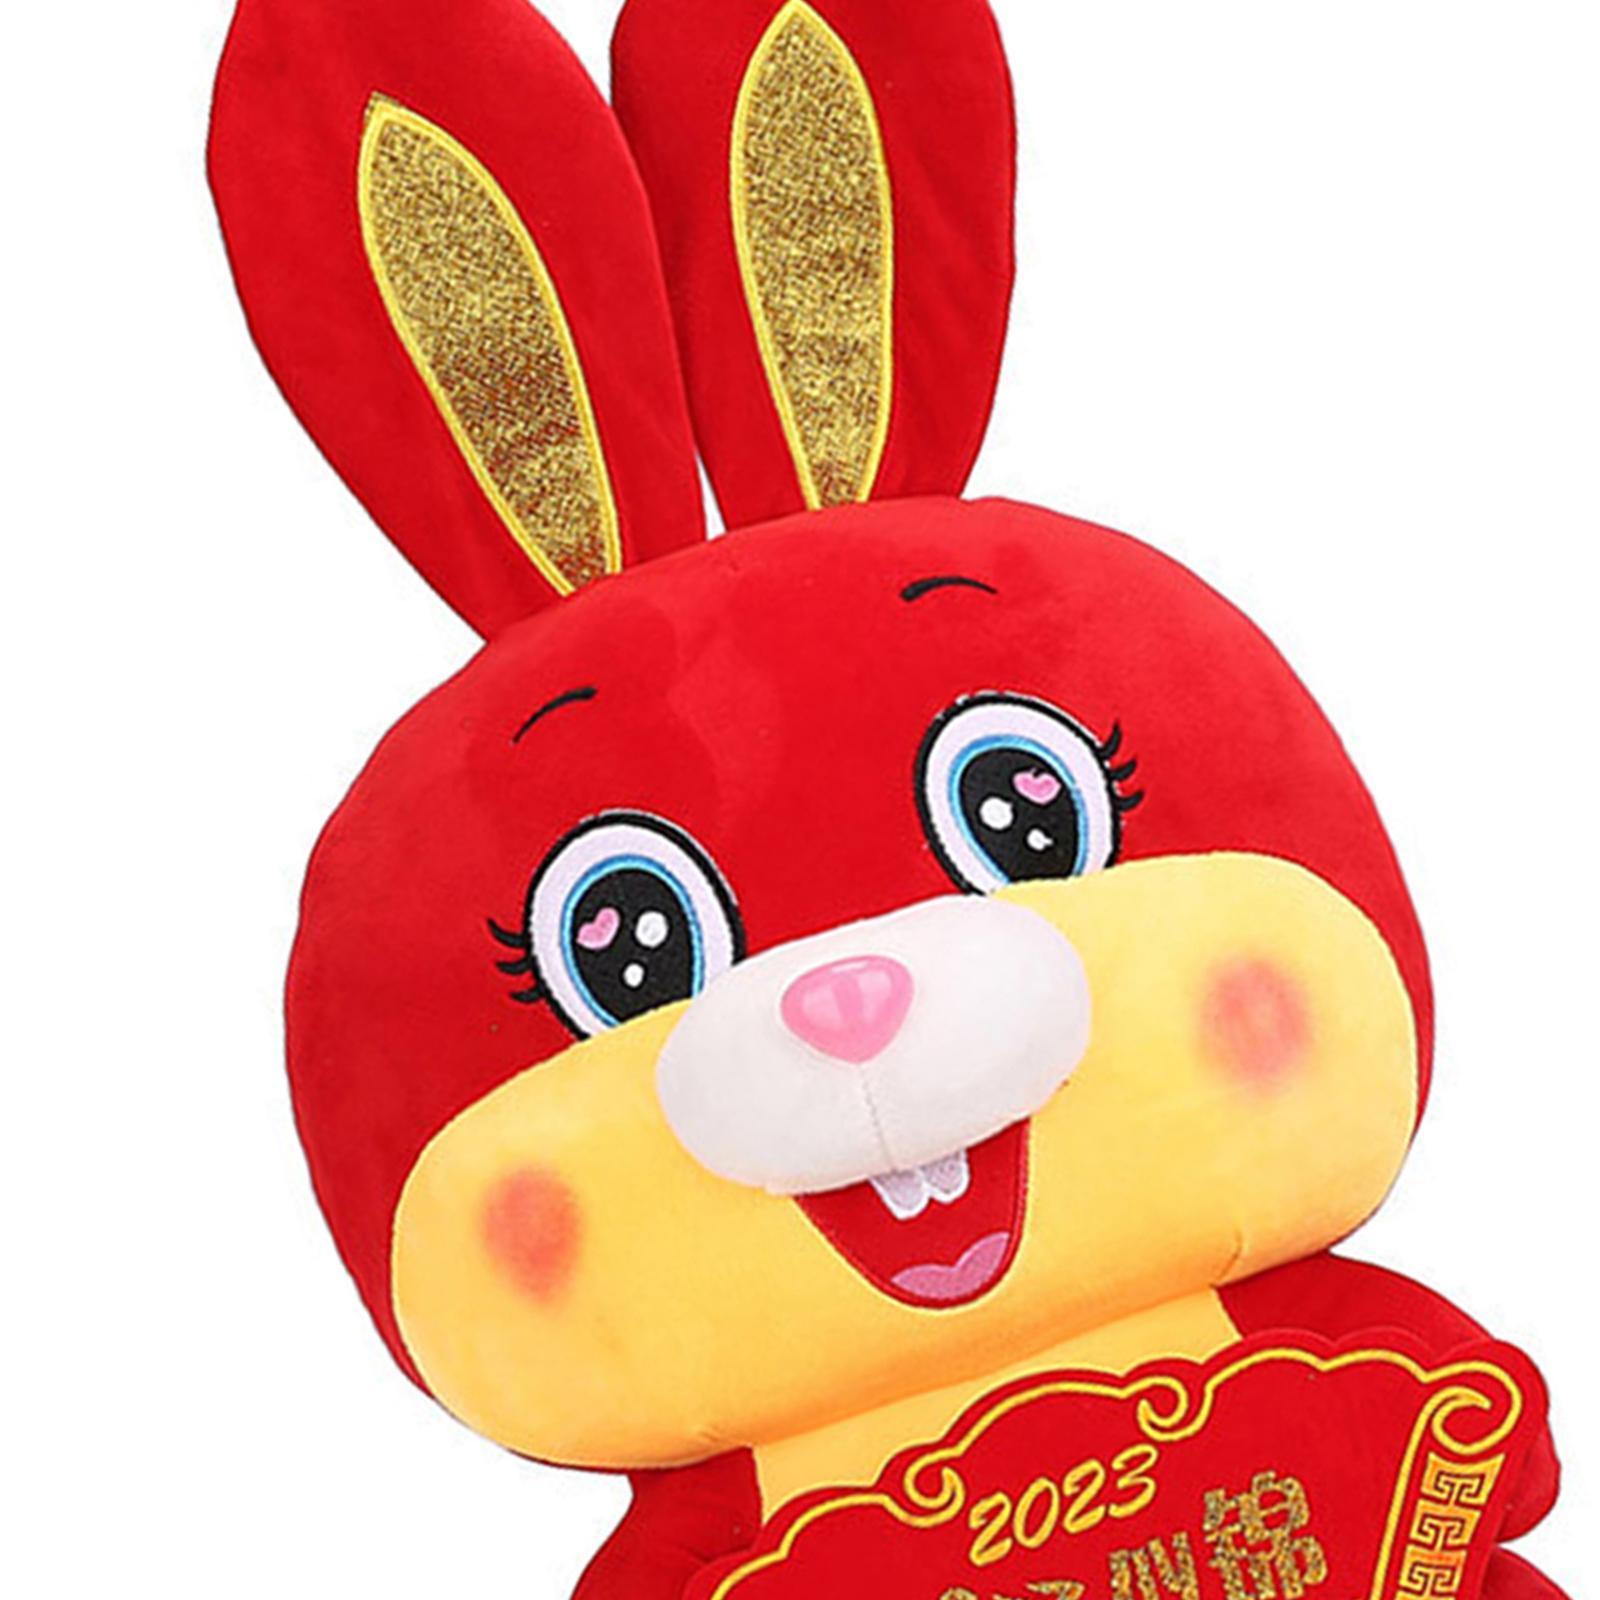 Chinese New Year Plush Toys Bunny Stuffed Dolls Decorative for Party Favor